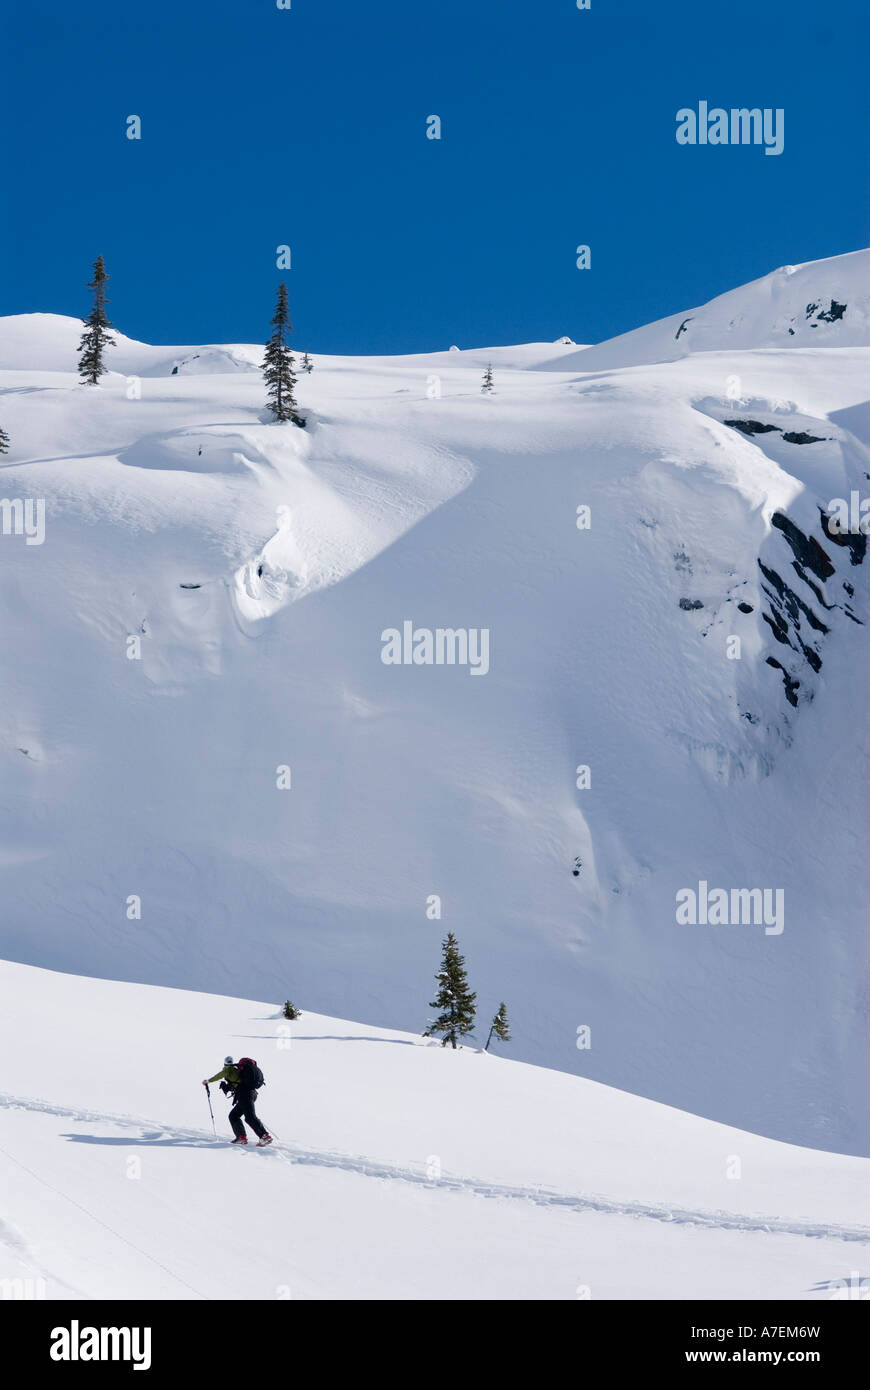 Skier skinning,  Rogers Pass area, Selkirk Mountains, Canadian Rockies, British Columbia, Canada Stock Photo